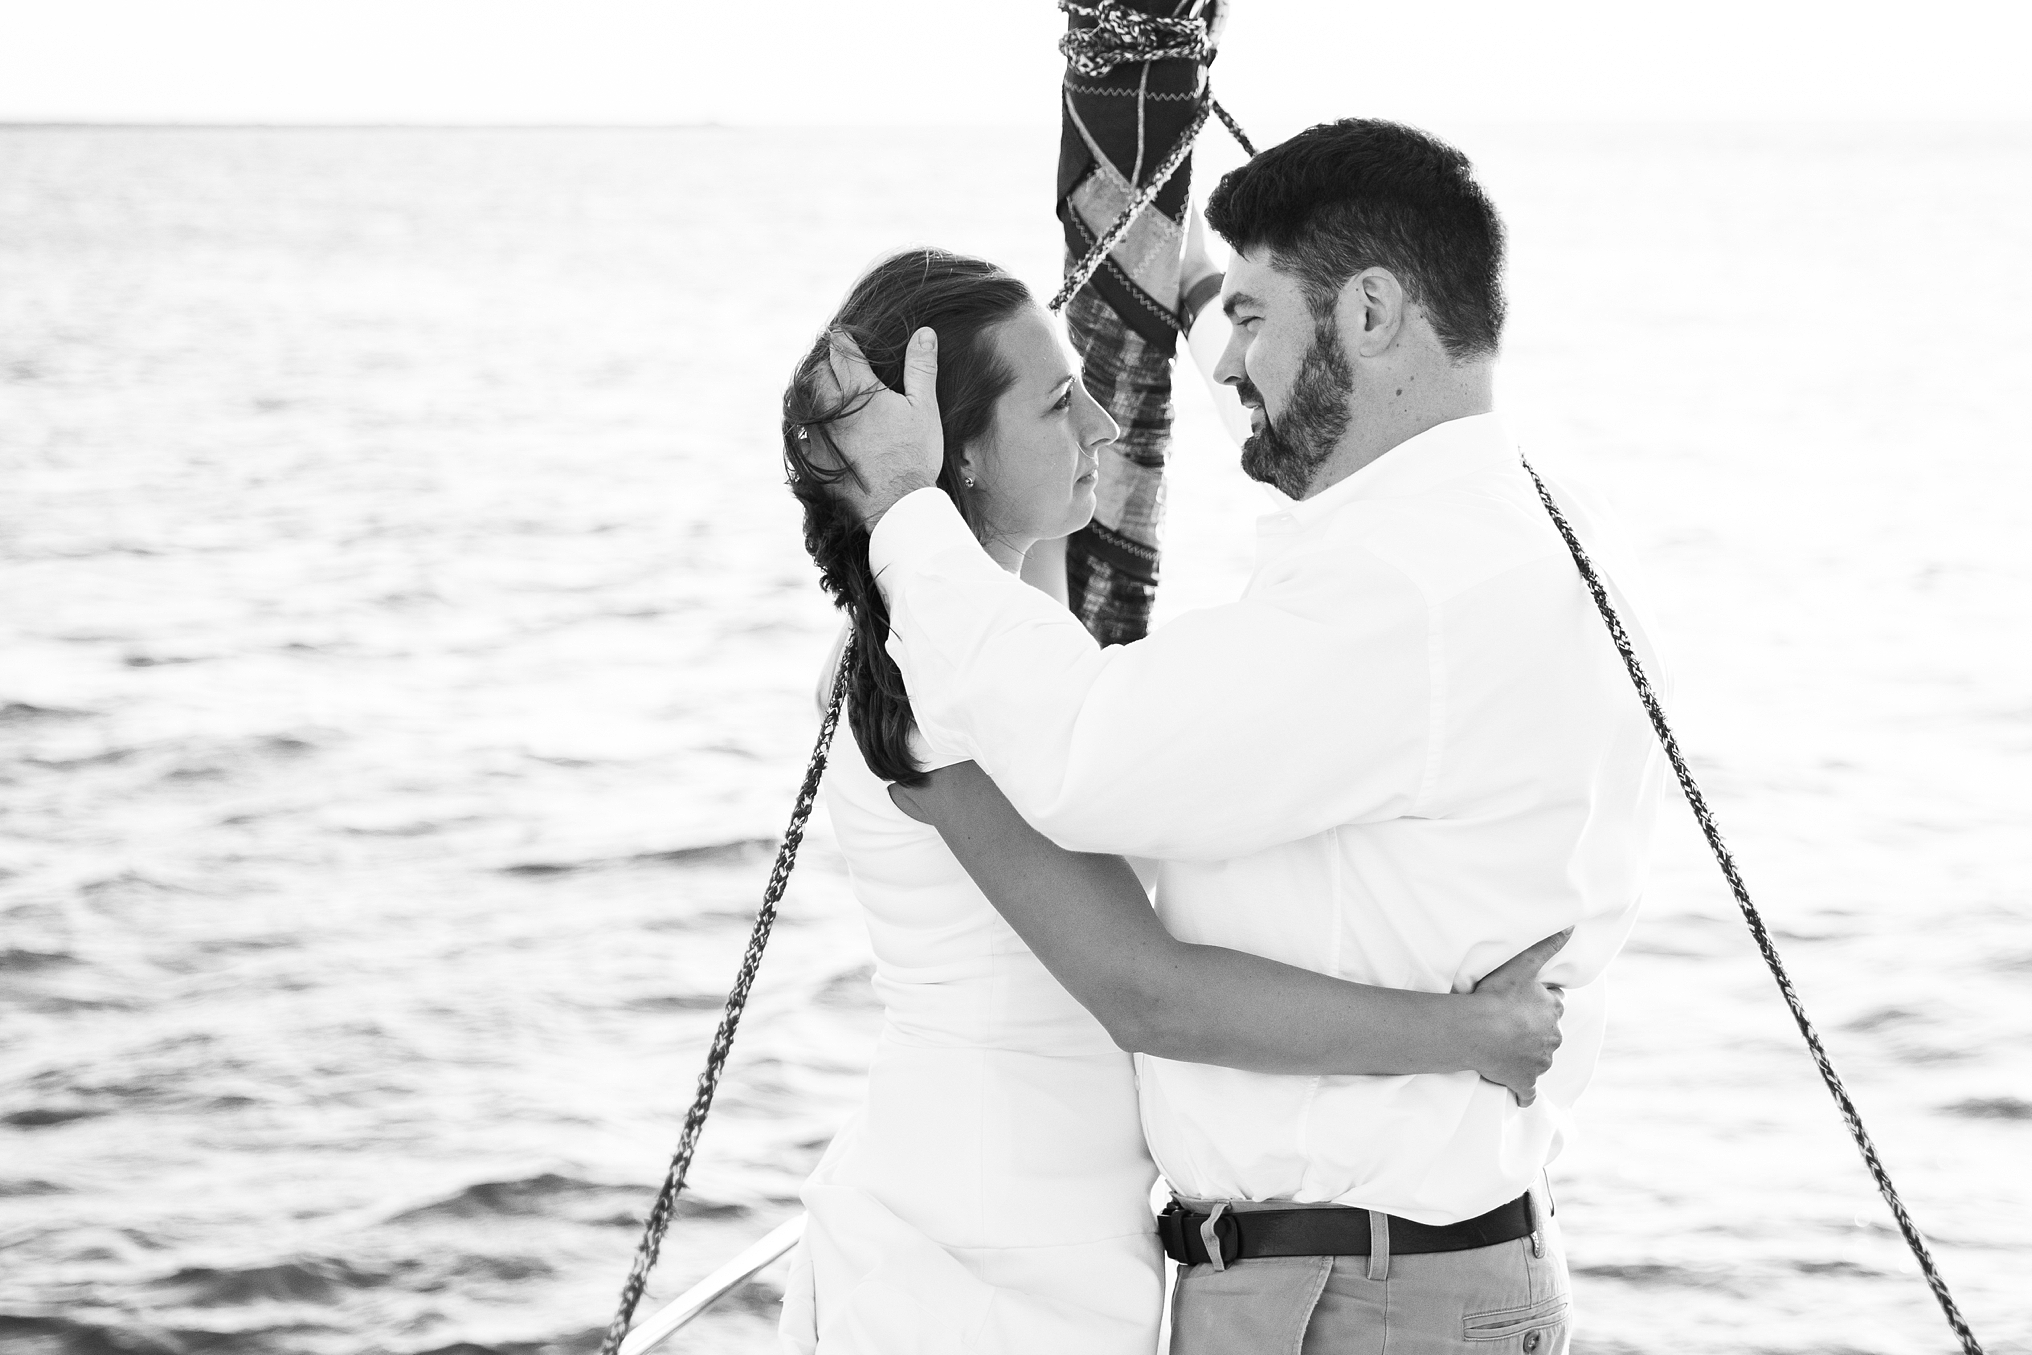 This is a sailboat engagement session on the Long Island Sound by CT Wedding Photographer and Videographers The Ewings